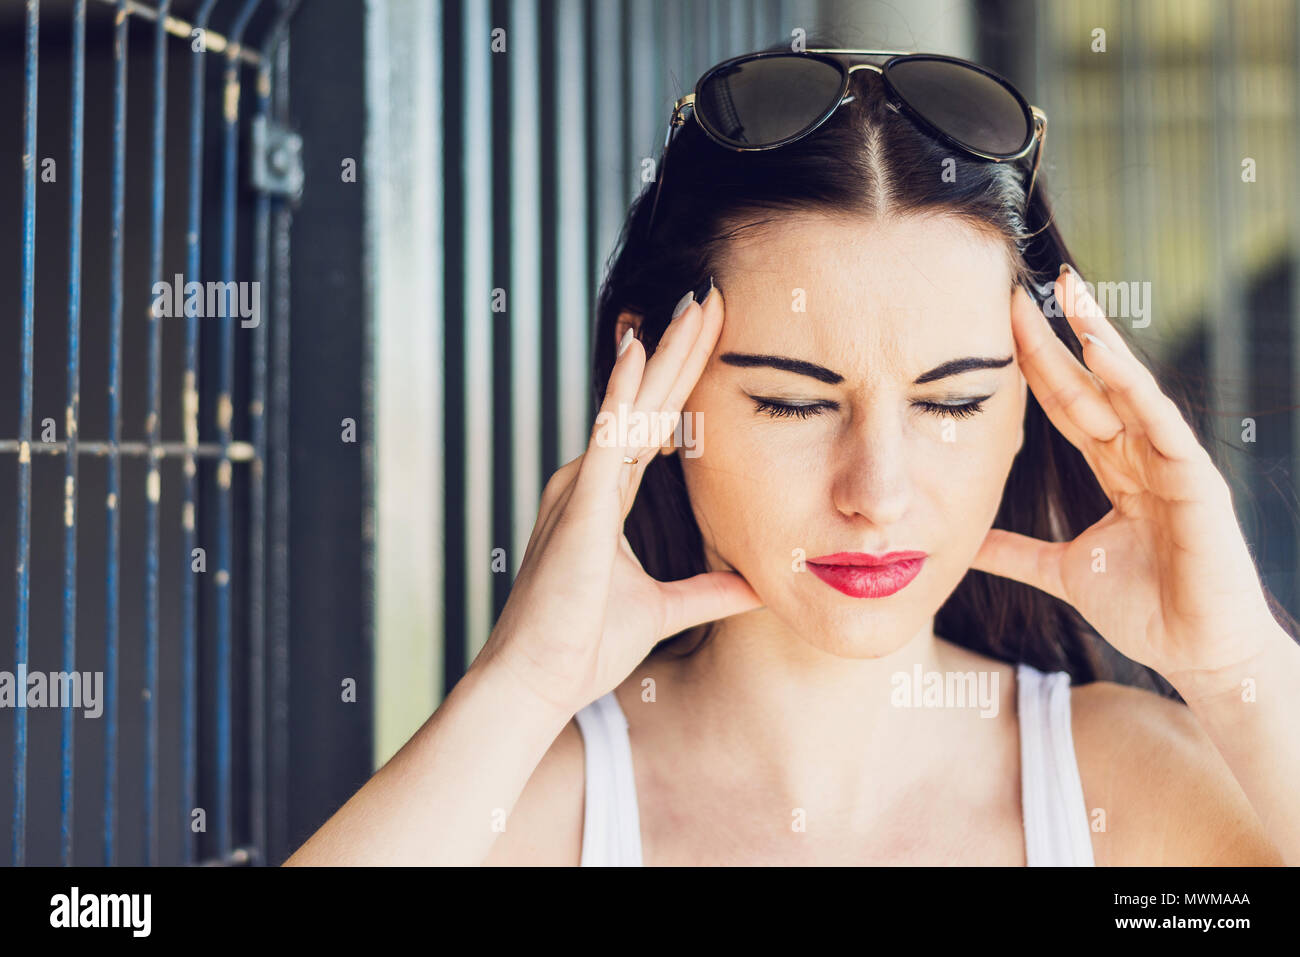 Headache The Woman Is Holding Her Hands Behind Her Head Feeling Of A Headache By A Female The